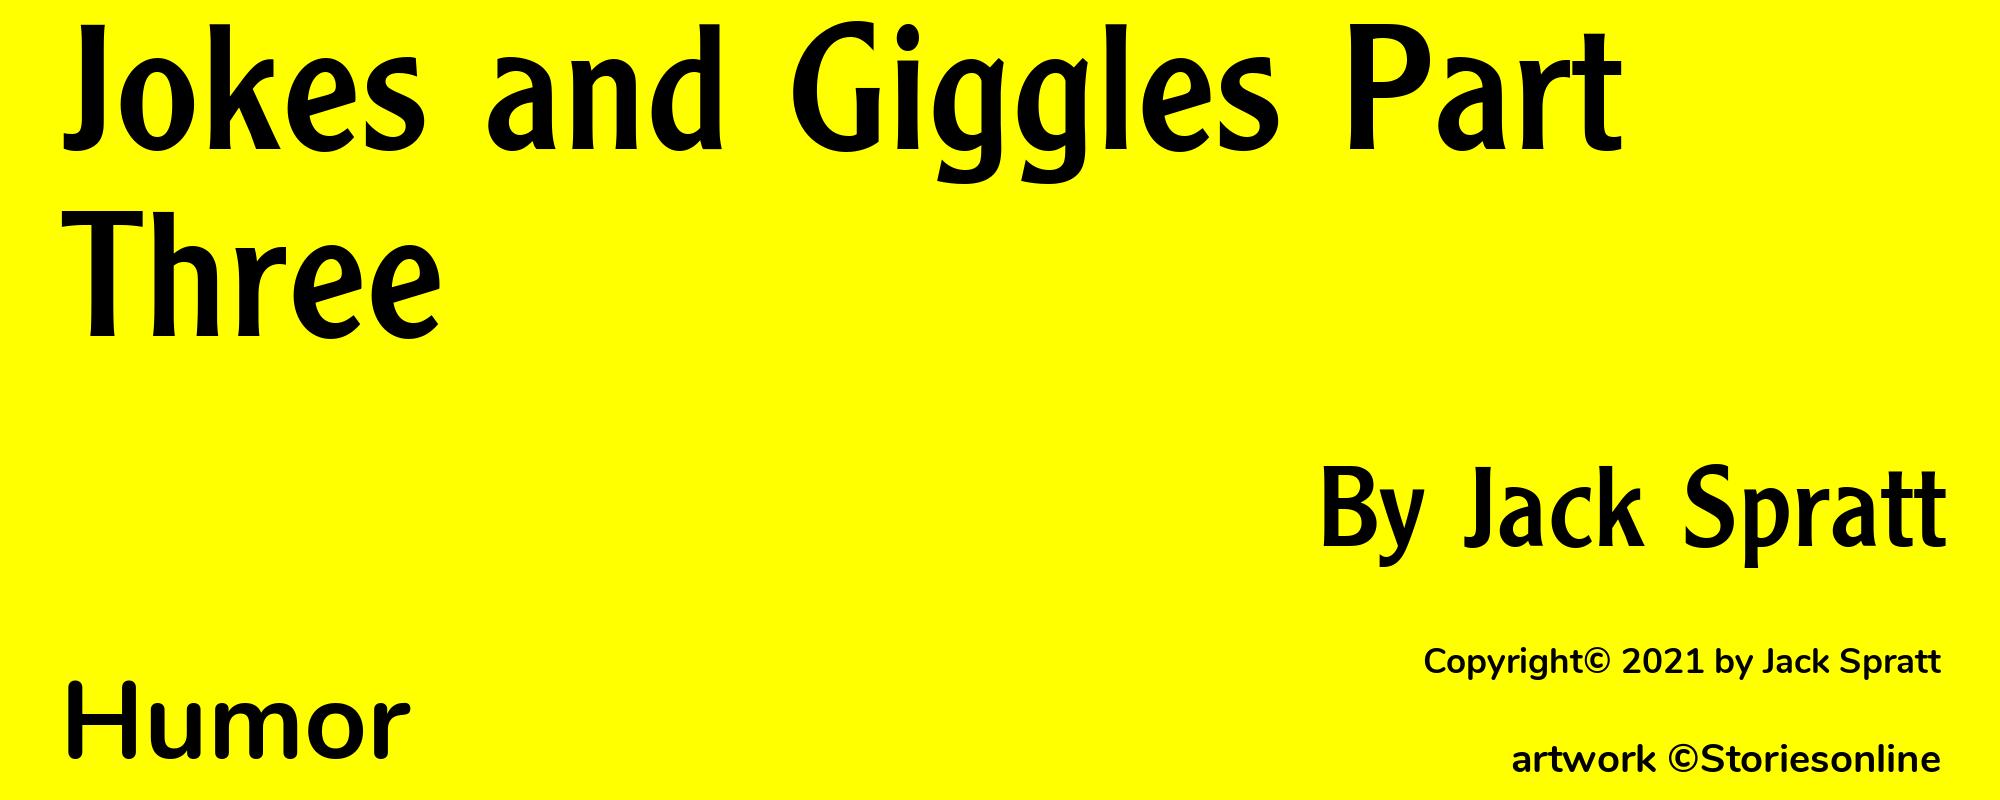 Jokes and Giggles Part Three - Cover